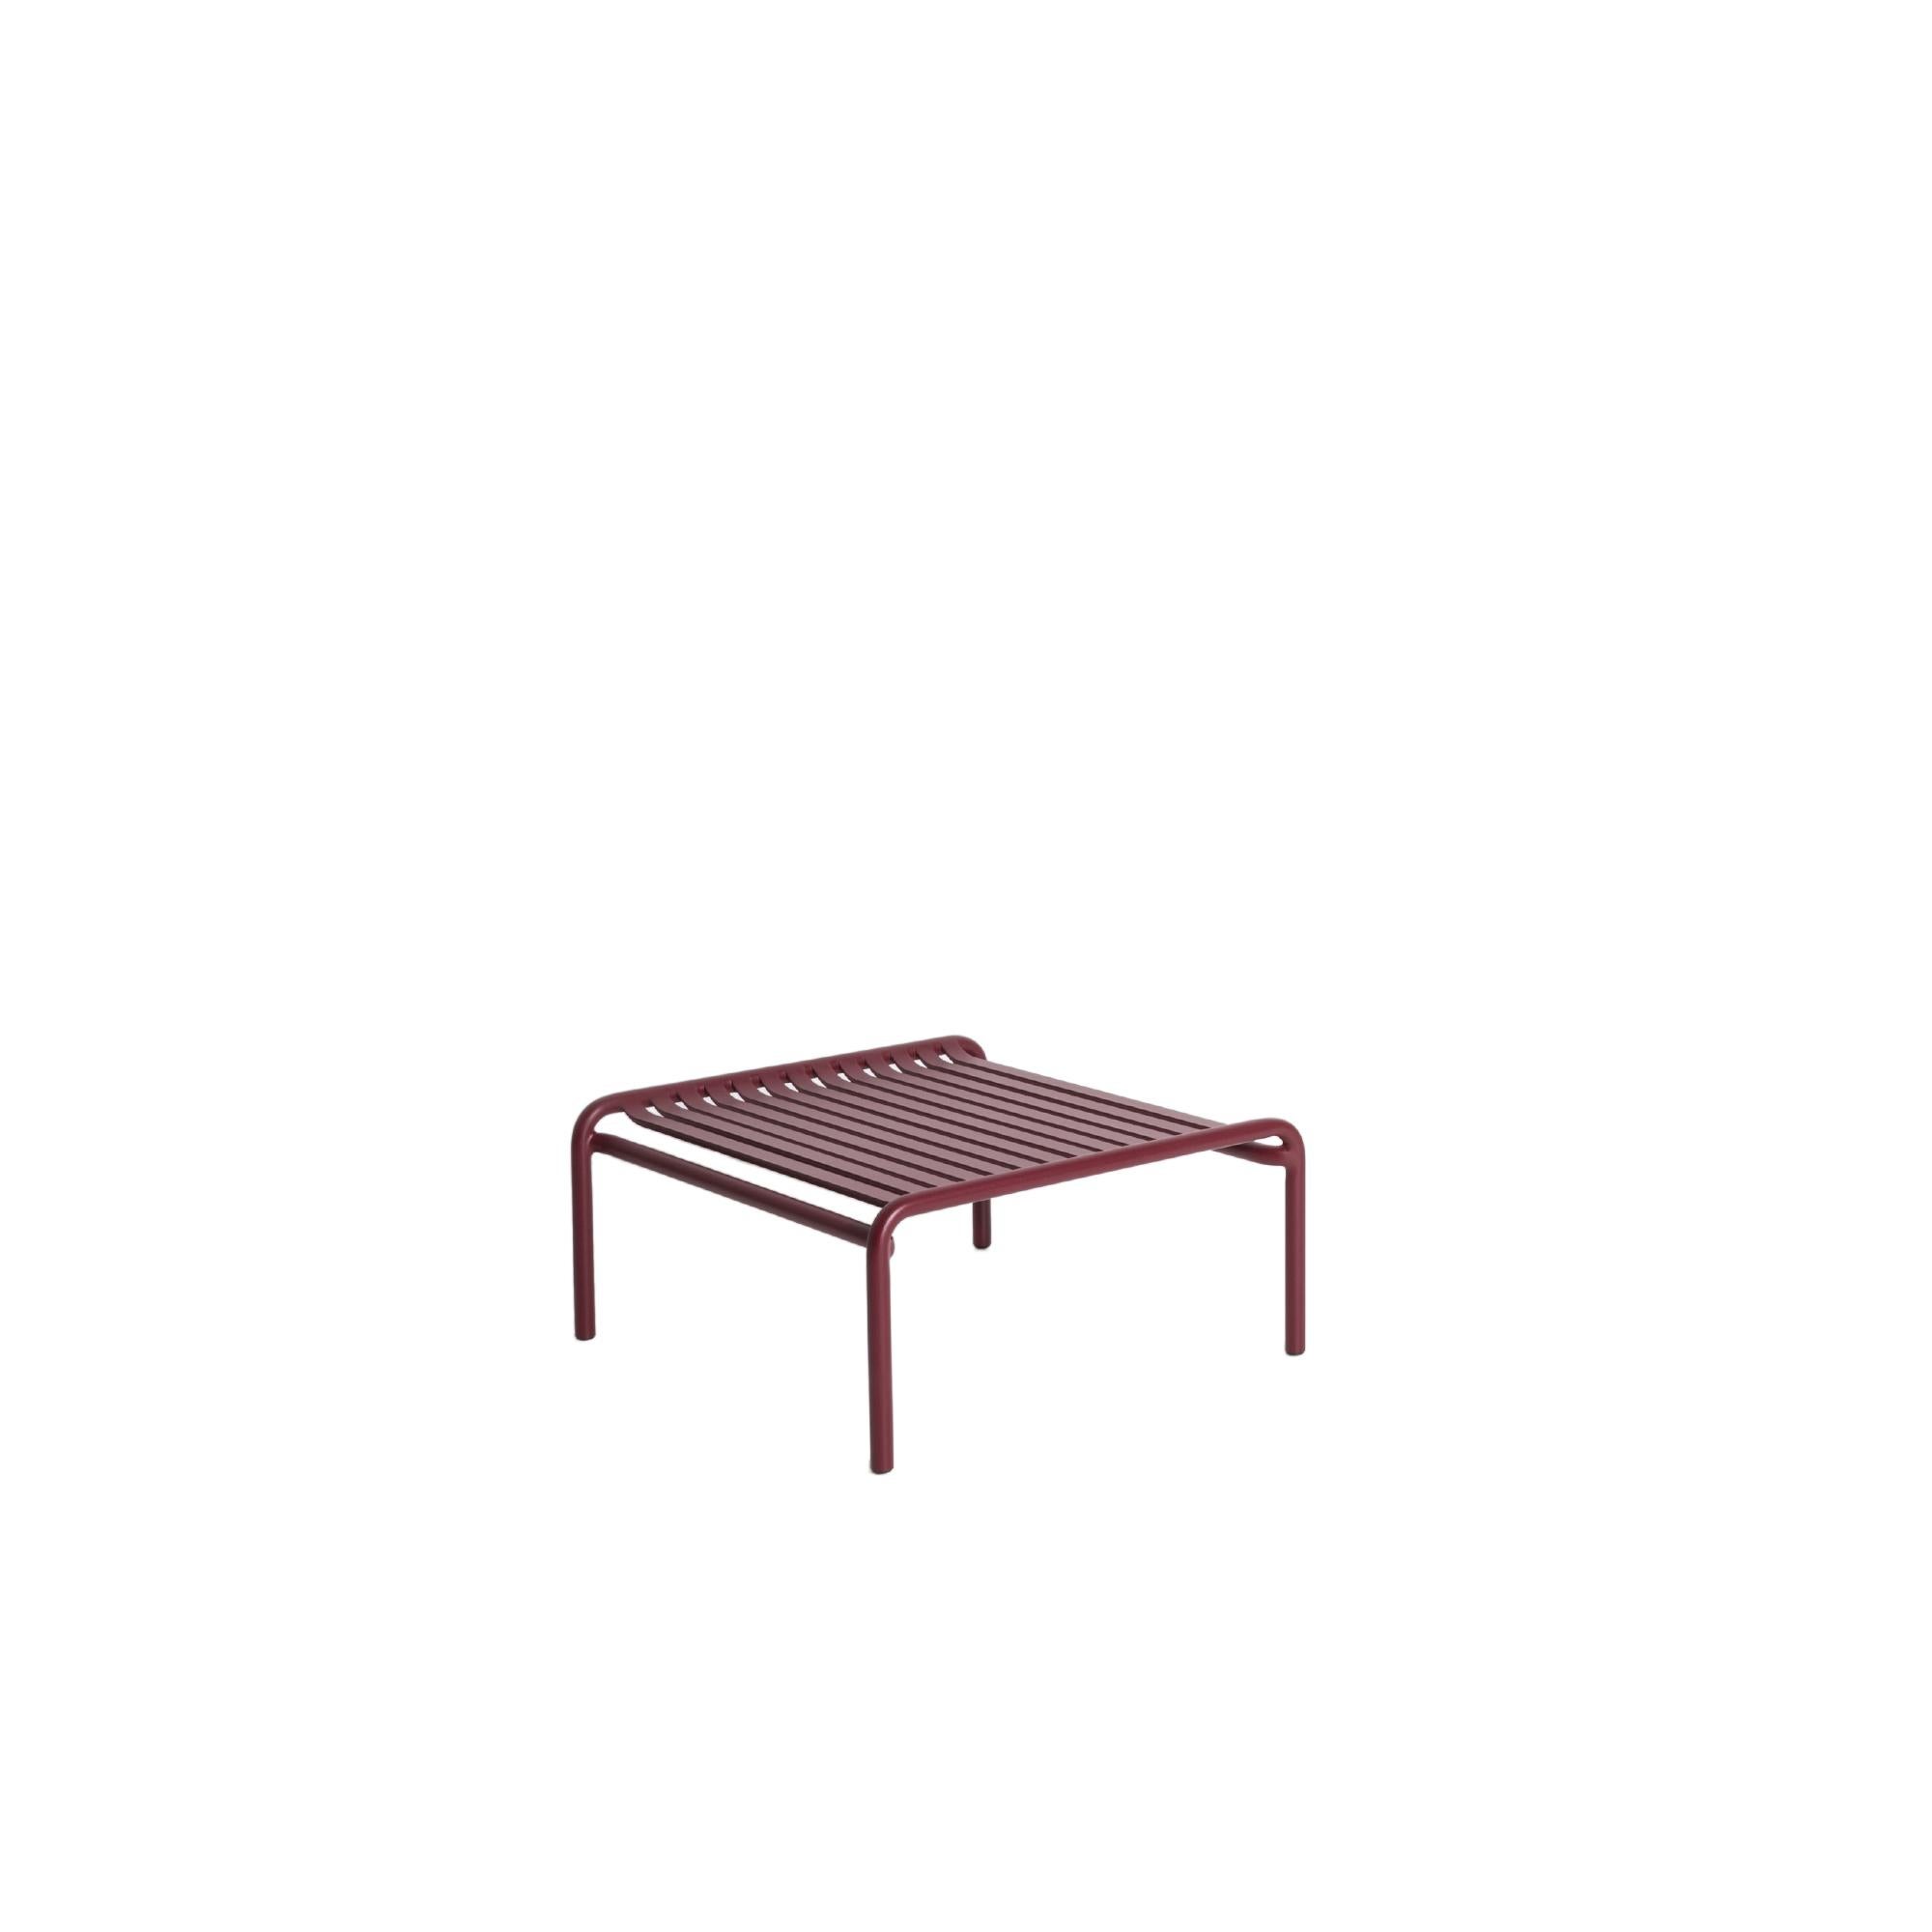 Petite Friture Week-End Coffee Table in Burgundy Aluminium by Studio BrichetZiegler, 2017

The week-end collection is a full range of outdoor furniture, in aluminium grained epoxy paint, matt finish, that includes 18 functions and 8 colours for